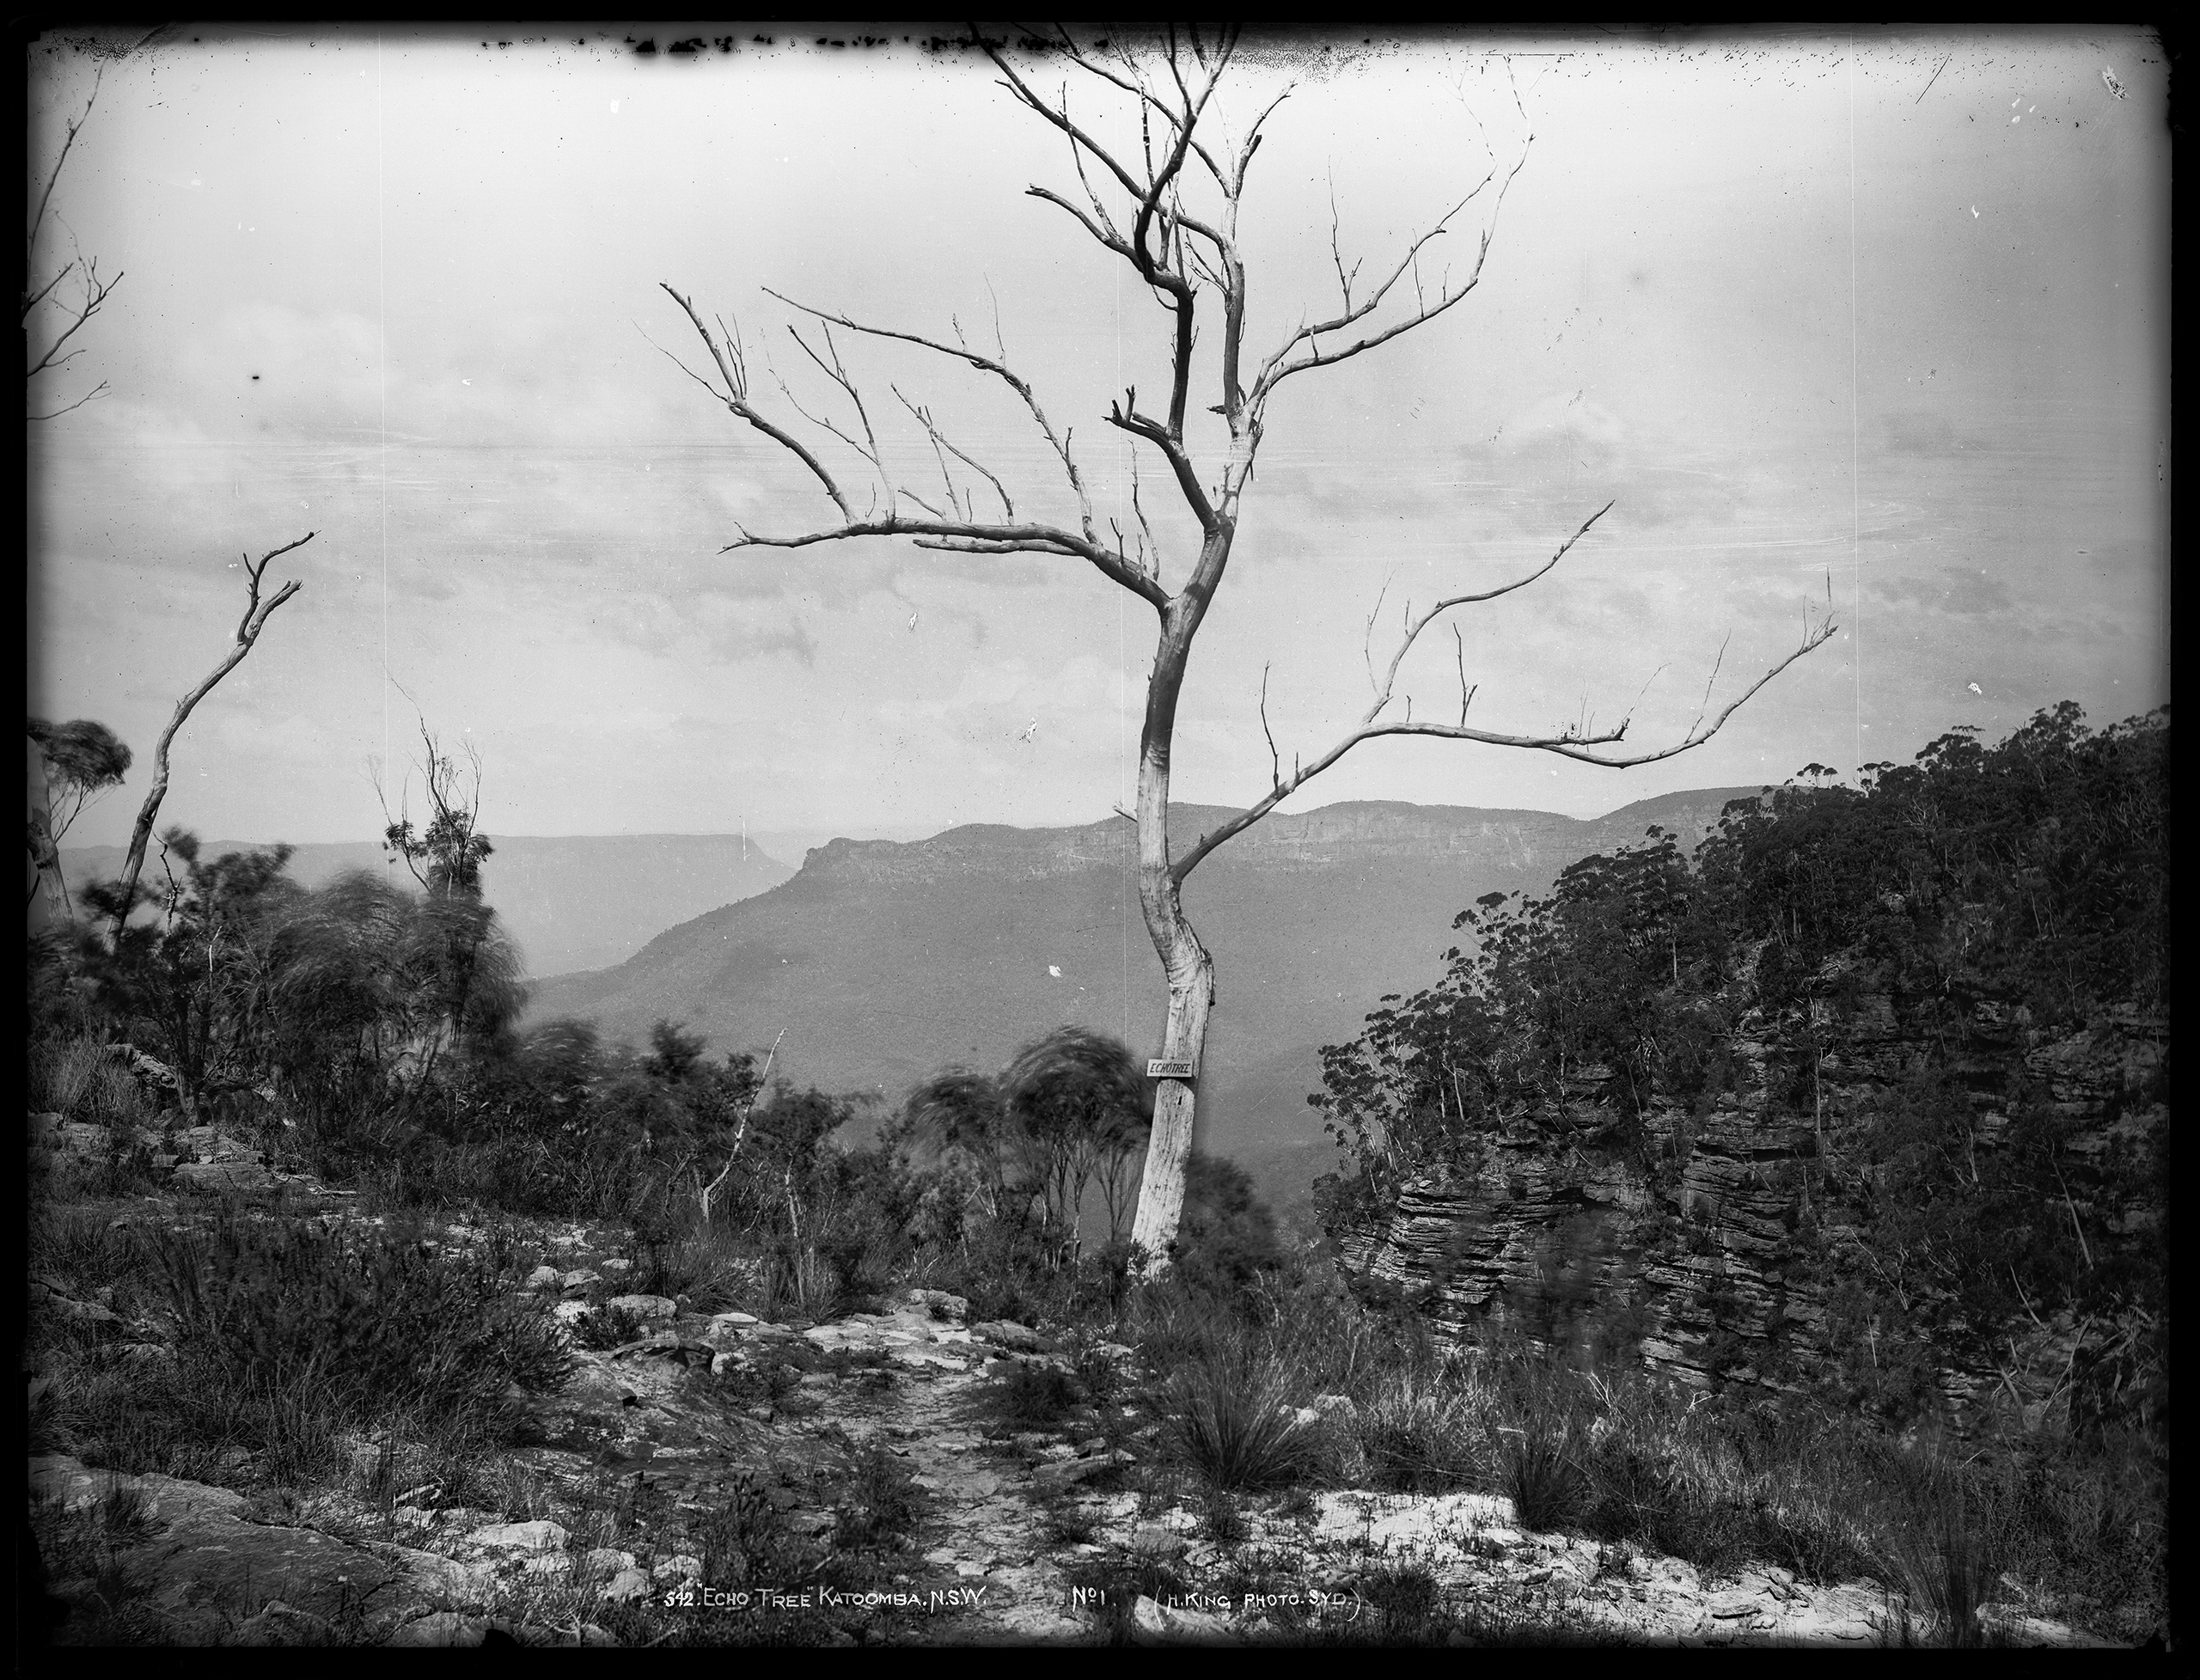 'Echo Tree, Katoomba, N.S.W., No. 1' by Henry King from the Tyrrell collection